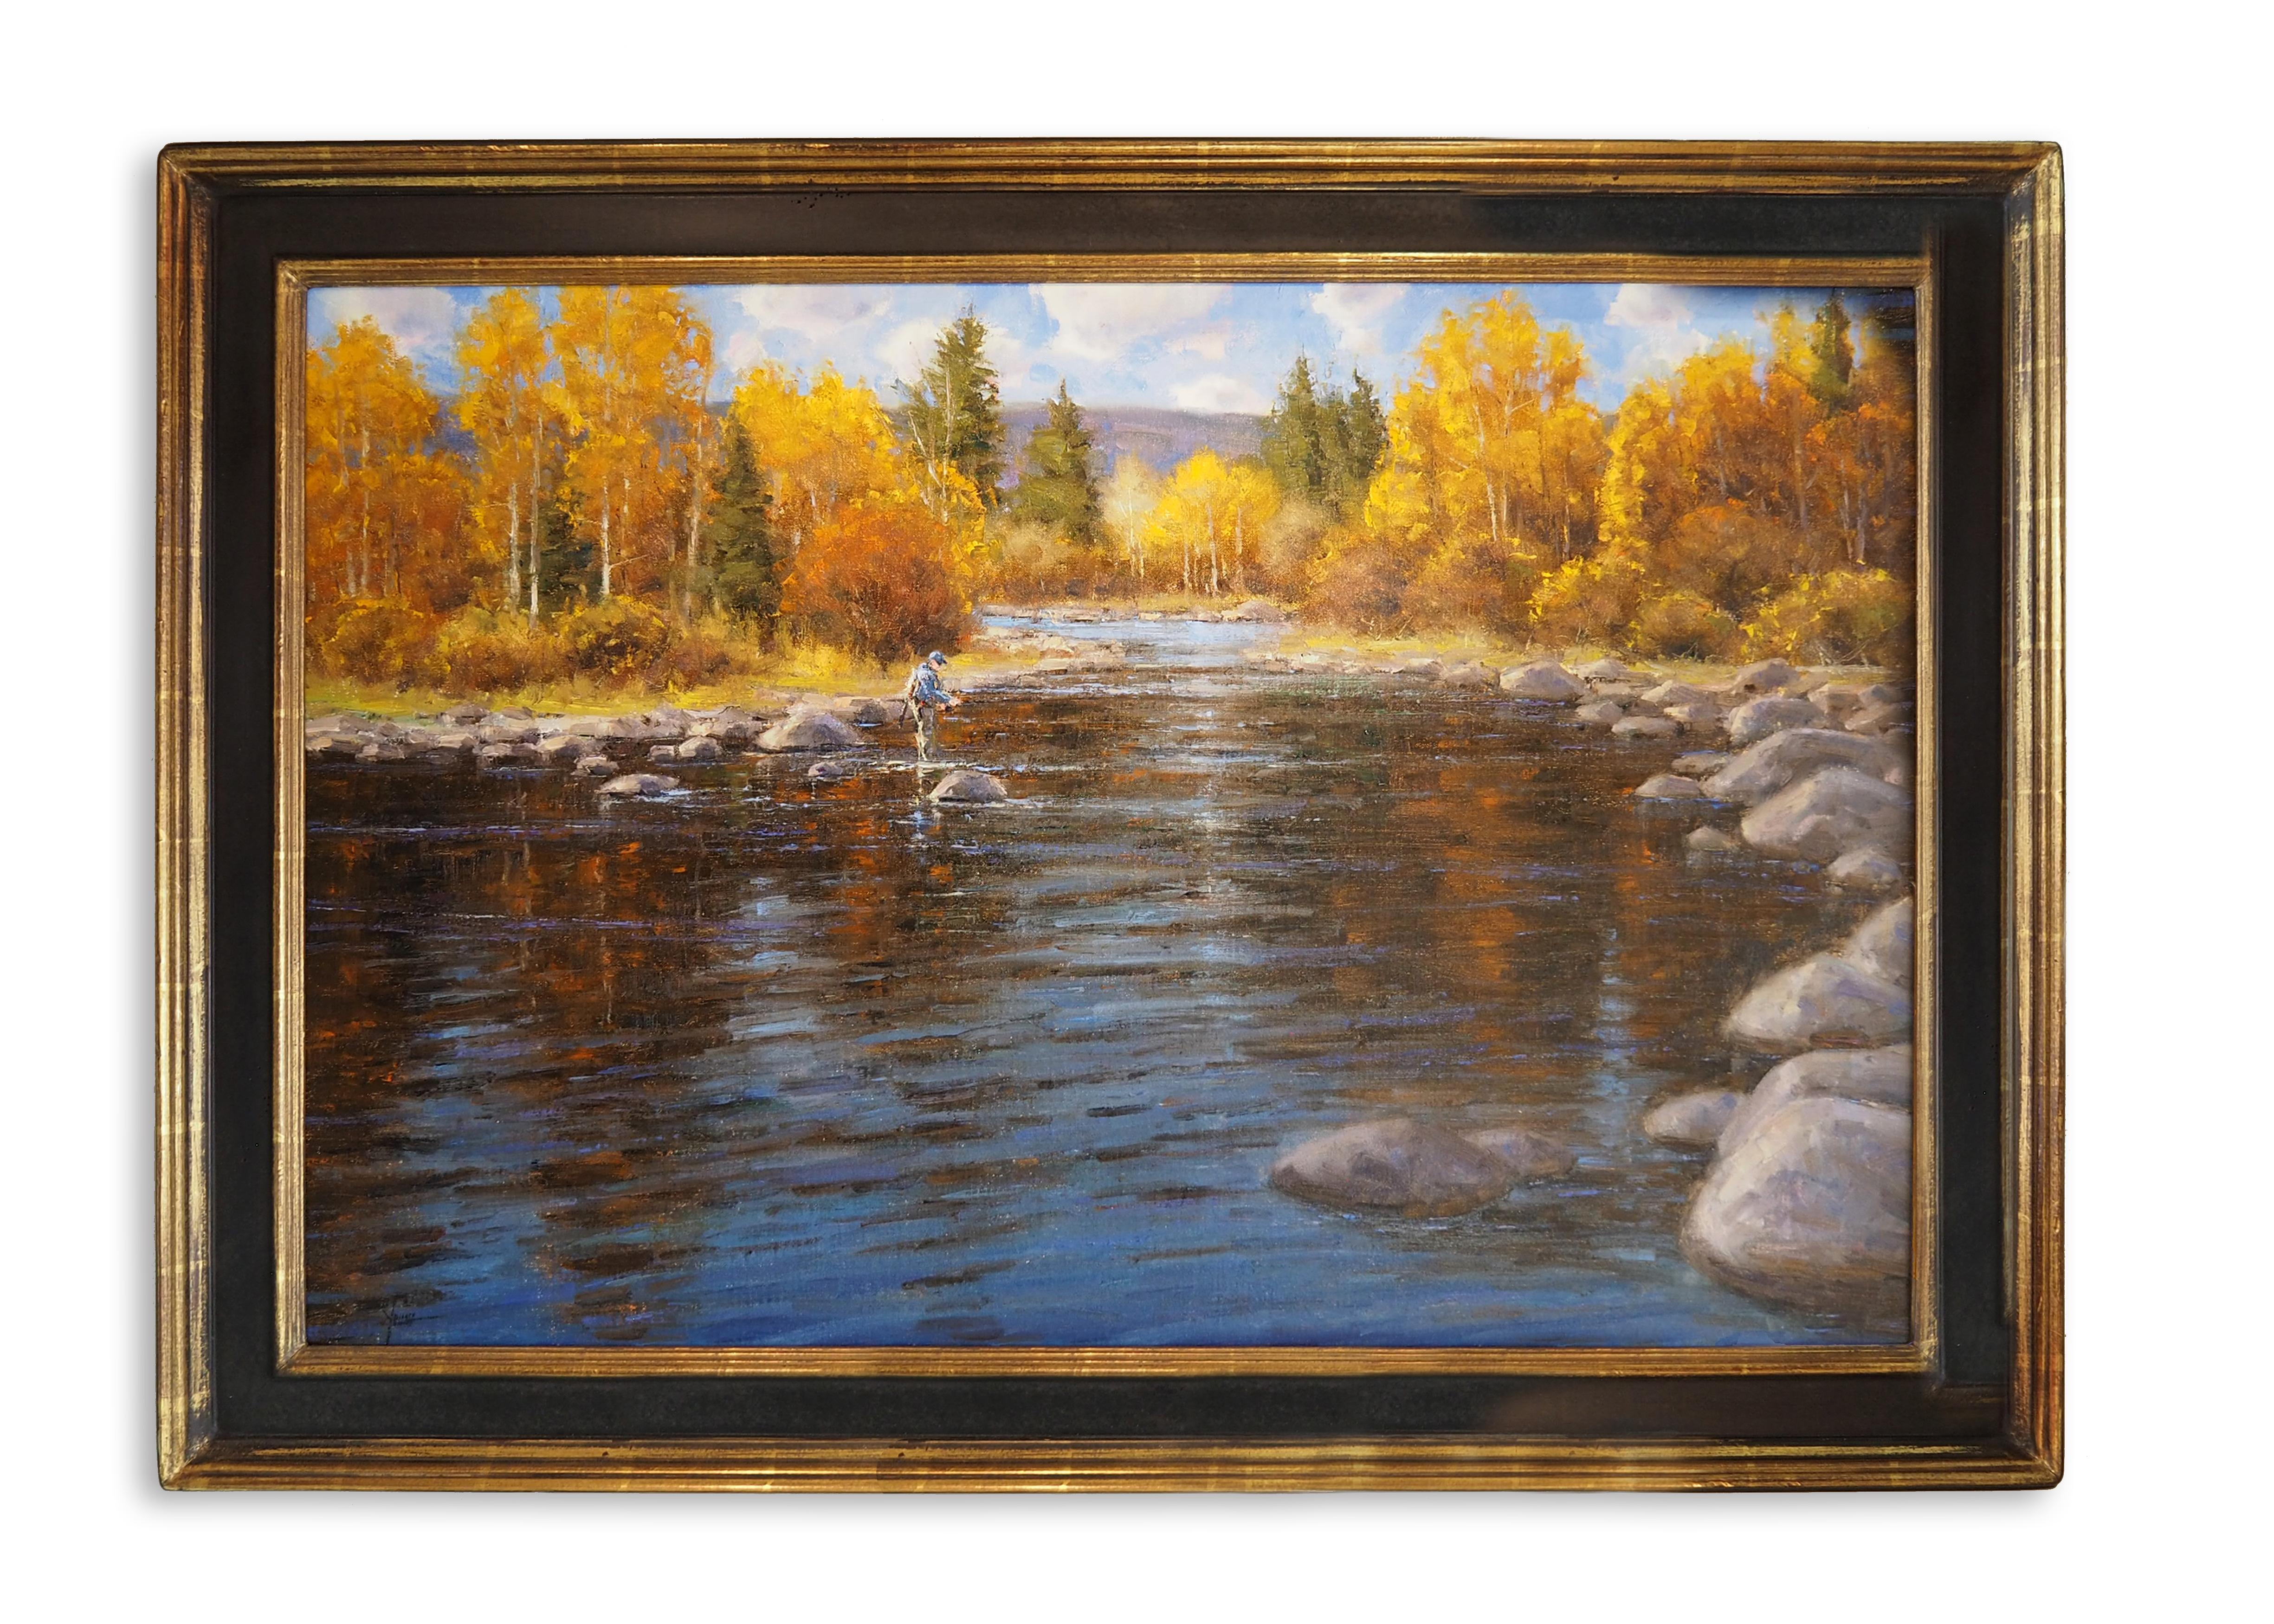 A Fall Day to Remember (fly fishing, river, reflection, Fall colors) - Painting by Dan Young